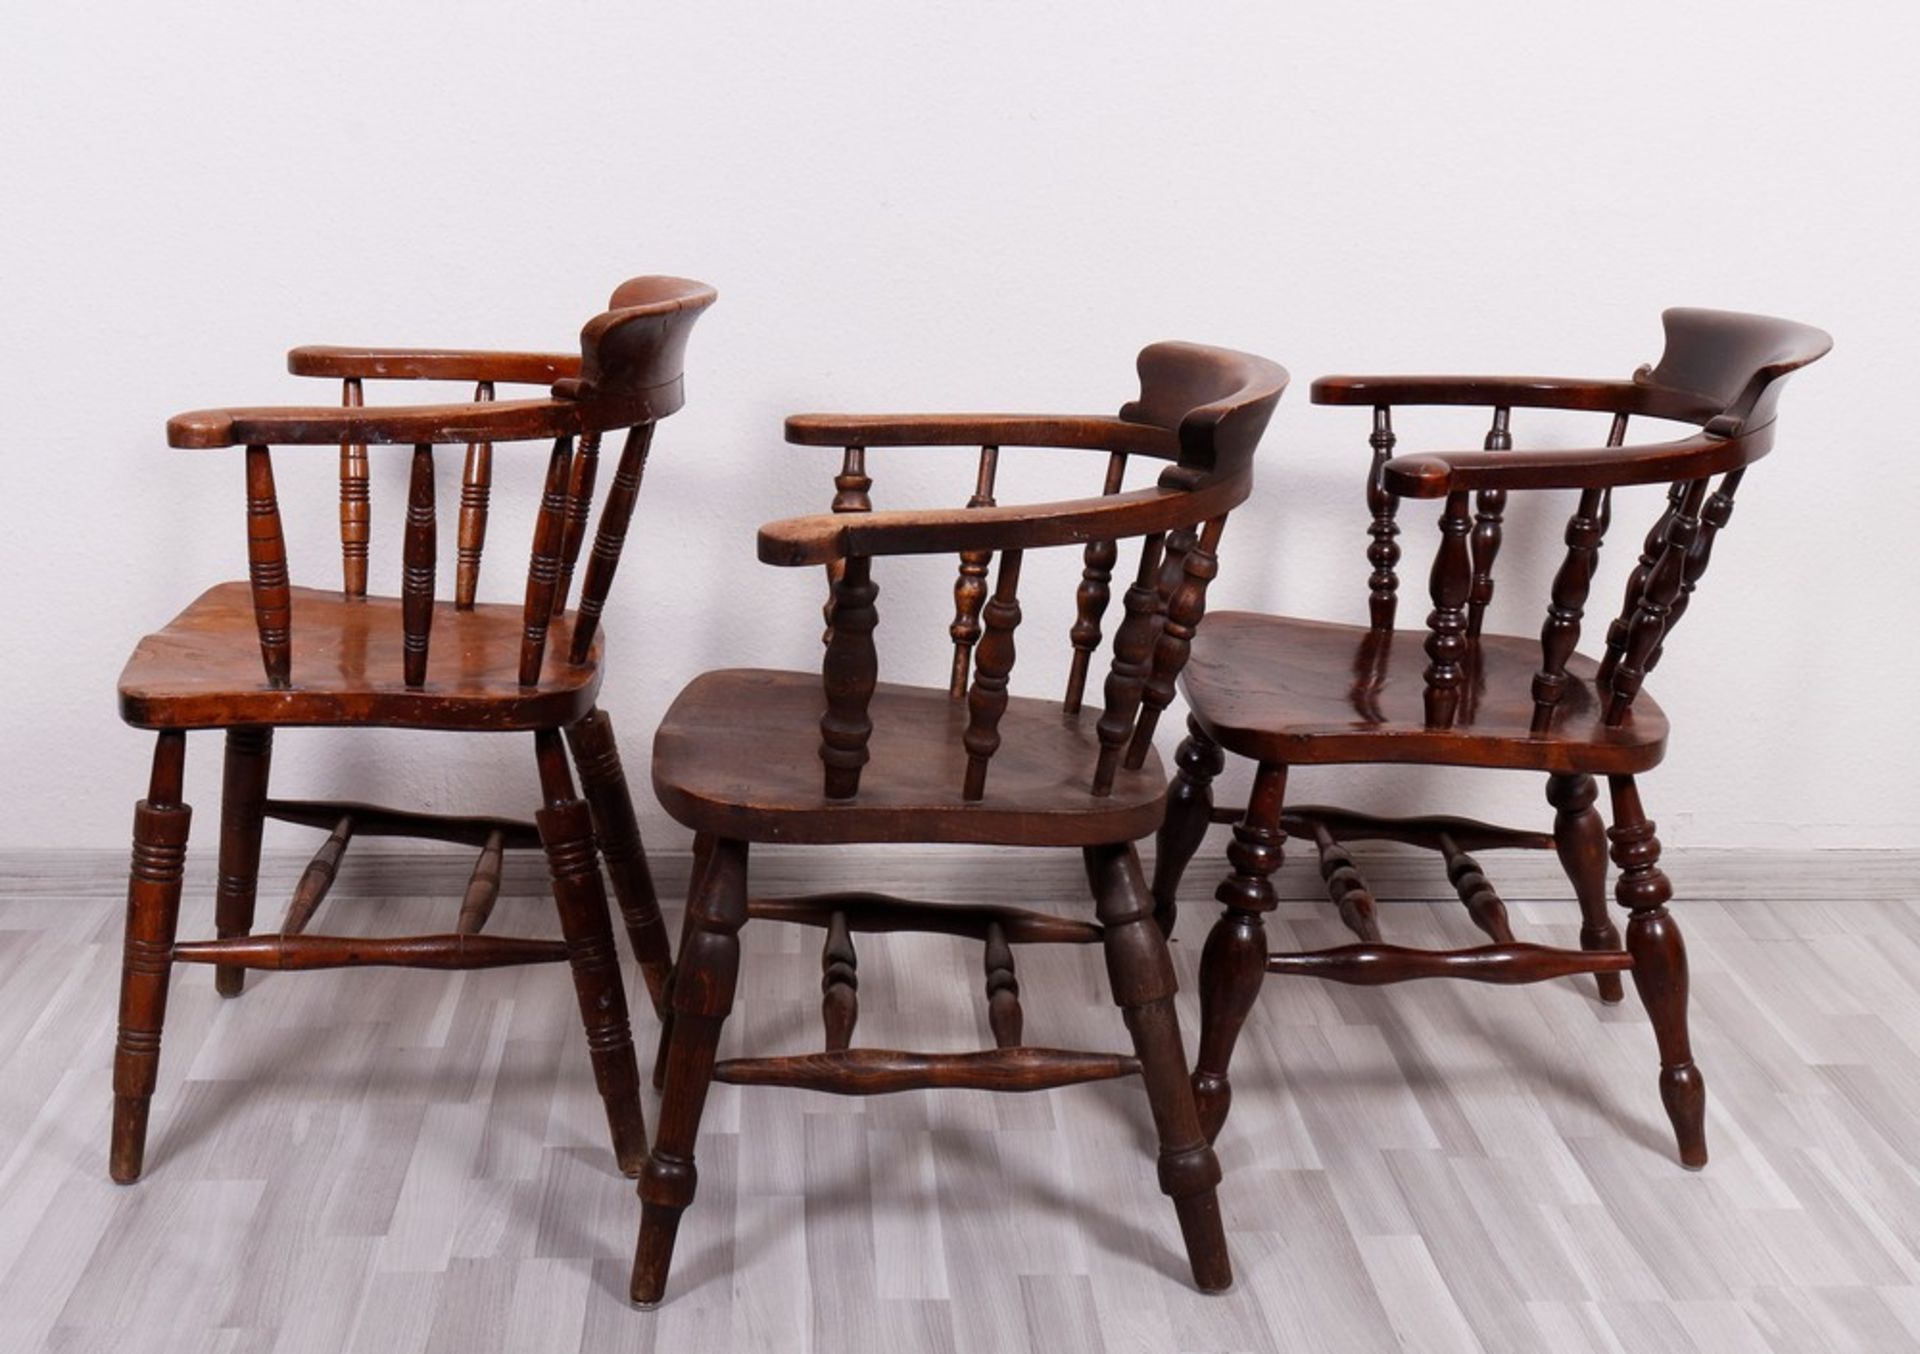 5 Smokers Chairs, England, 19th/20th C. - Image 3 of 4